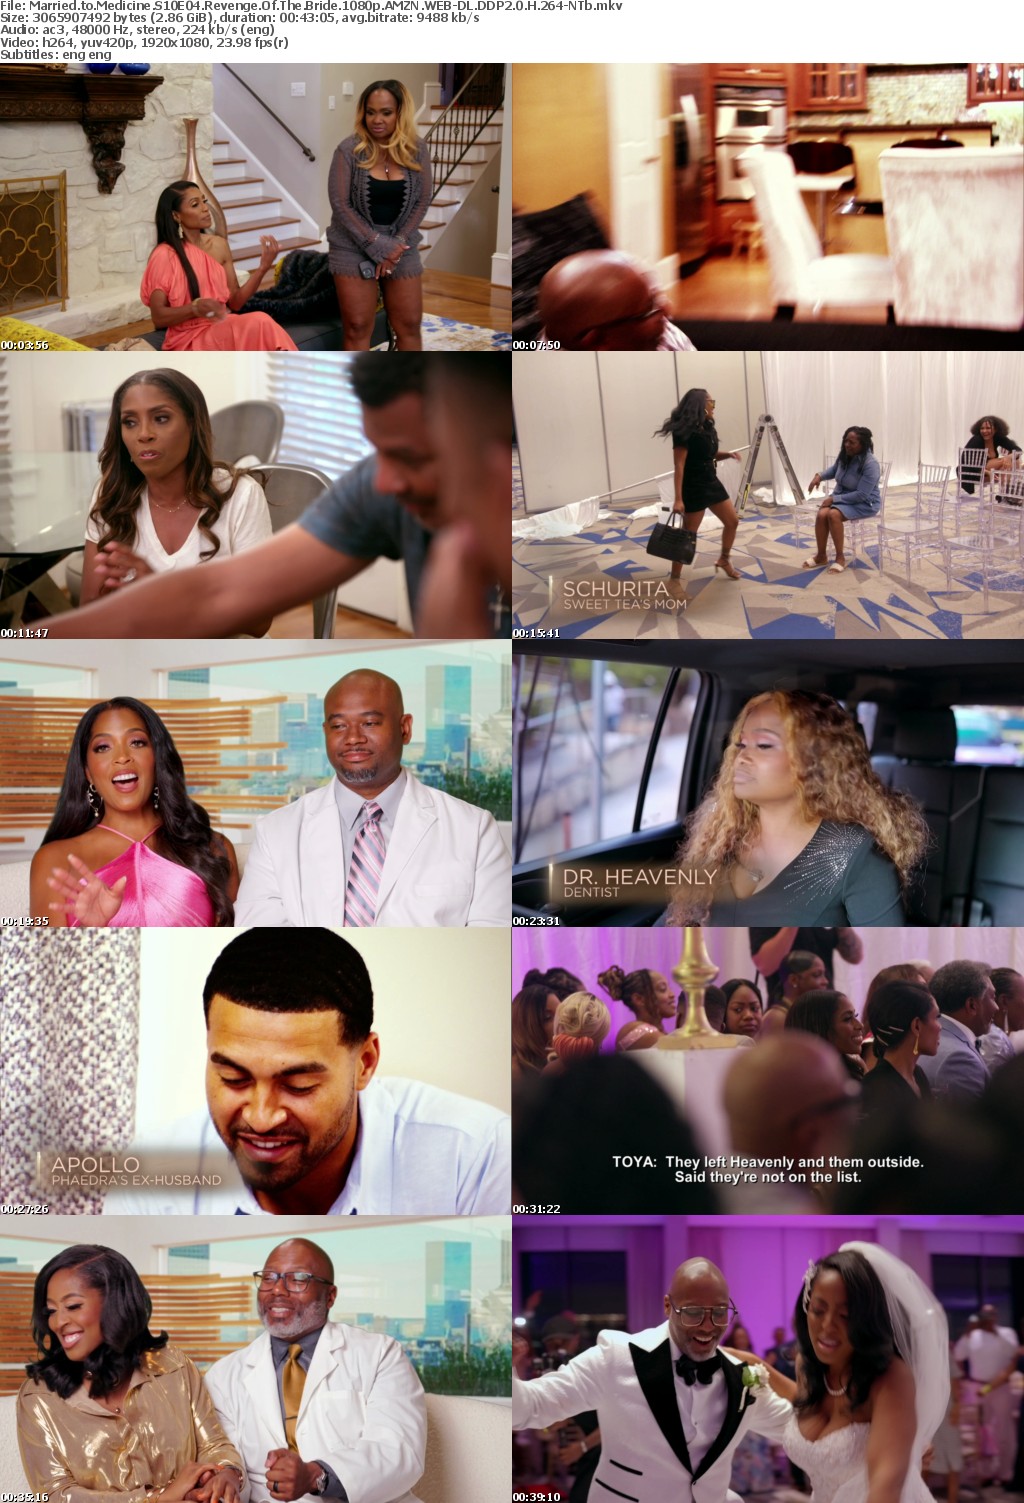 Married to Medicine S10E04 Revenge Of The Bride 1080p AMZN WEB-DL DDP2 0 H 264-NTb